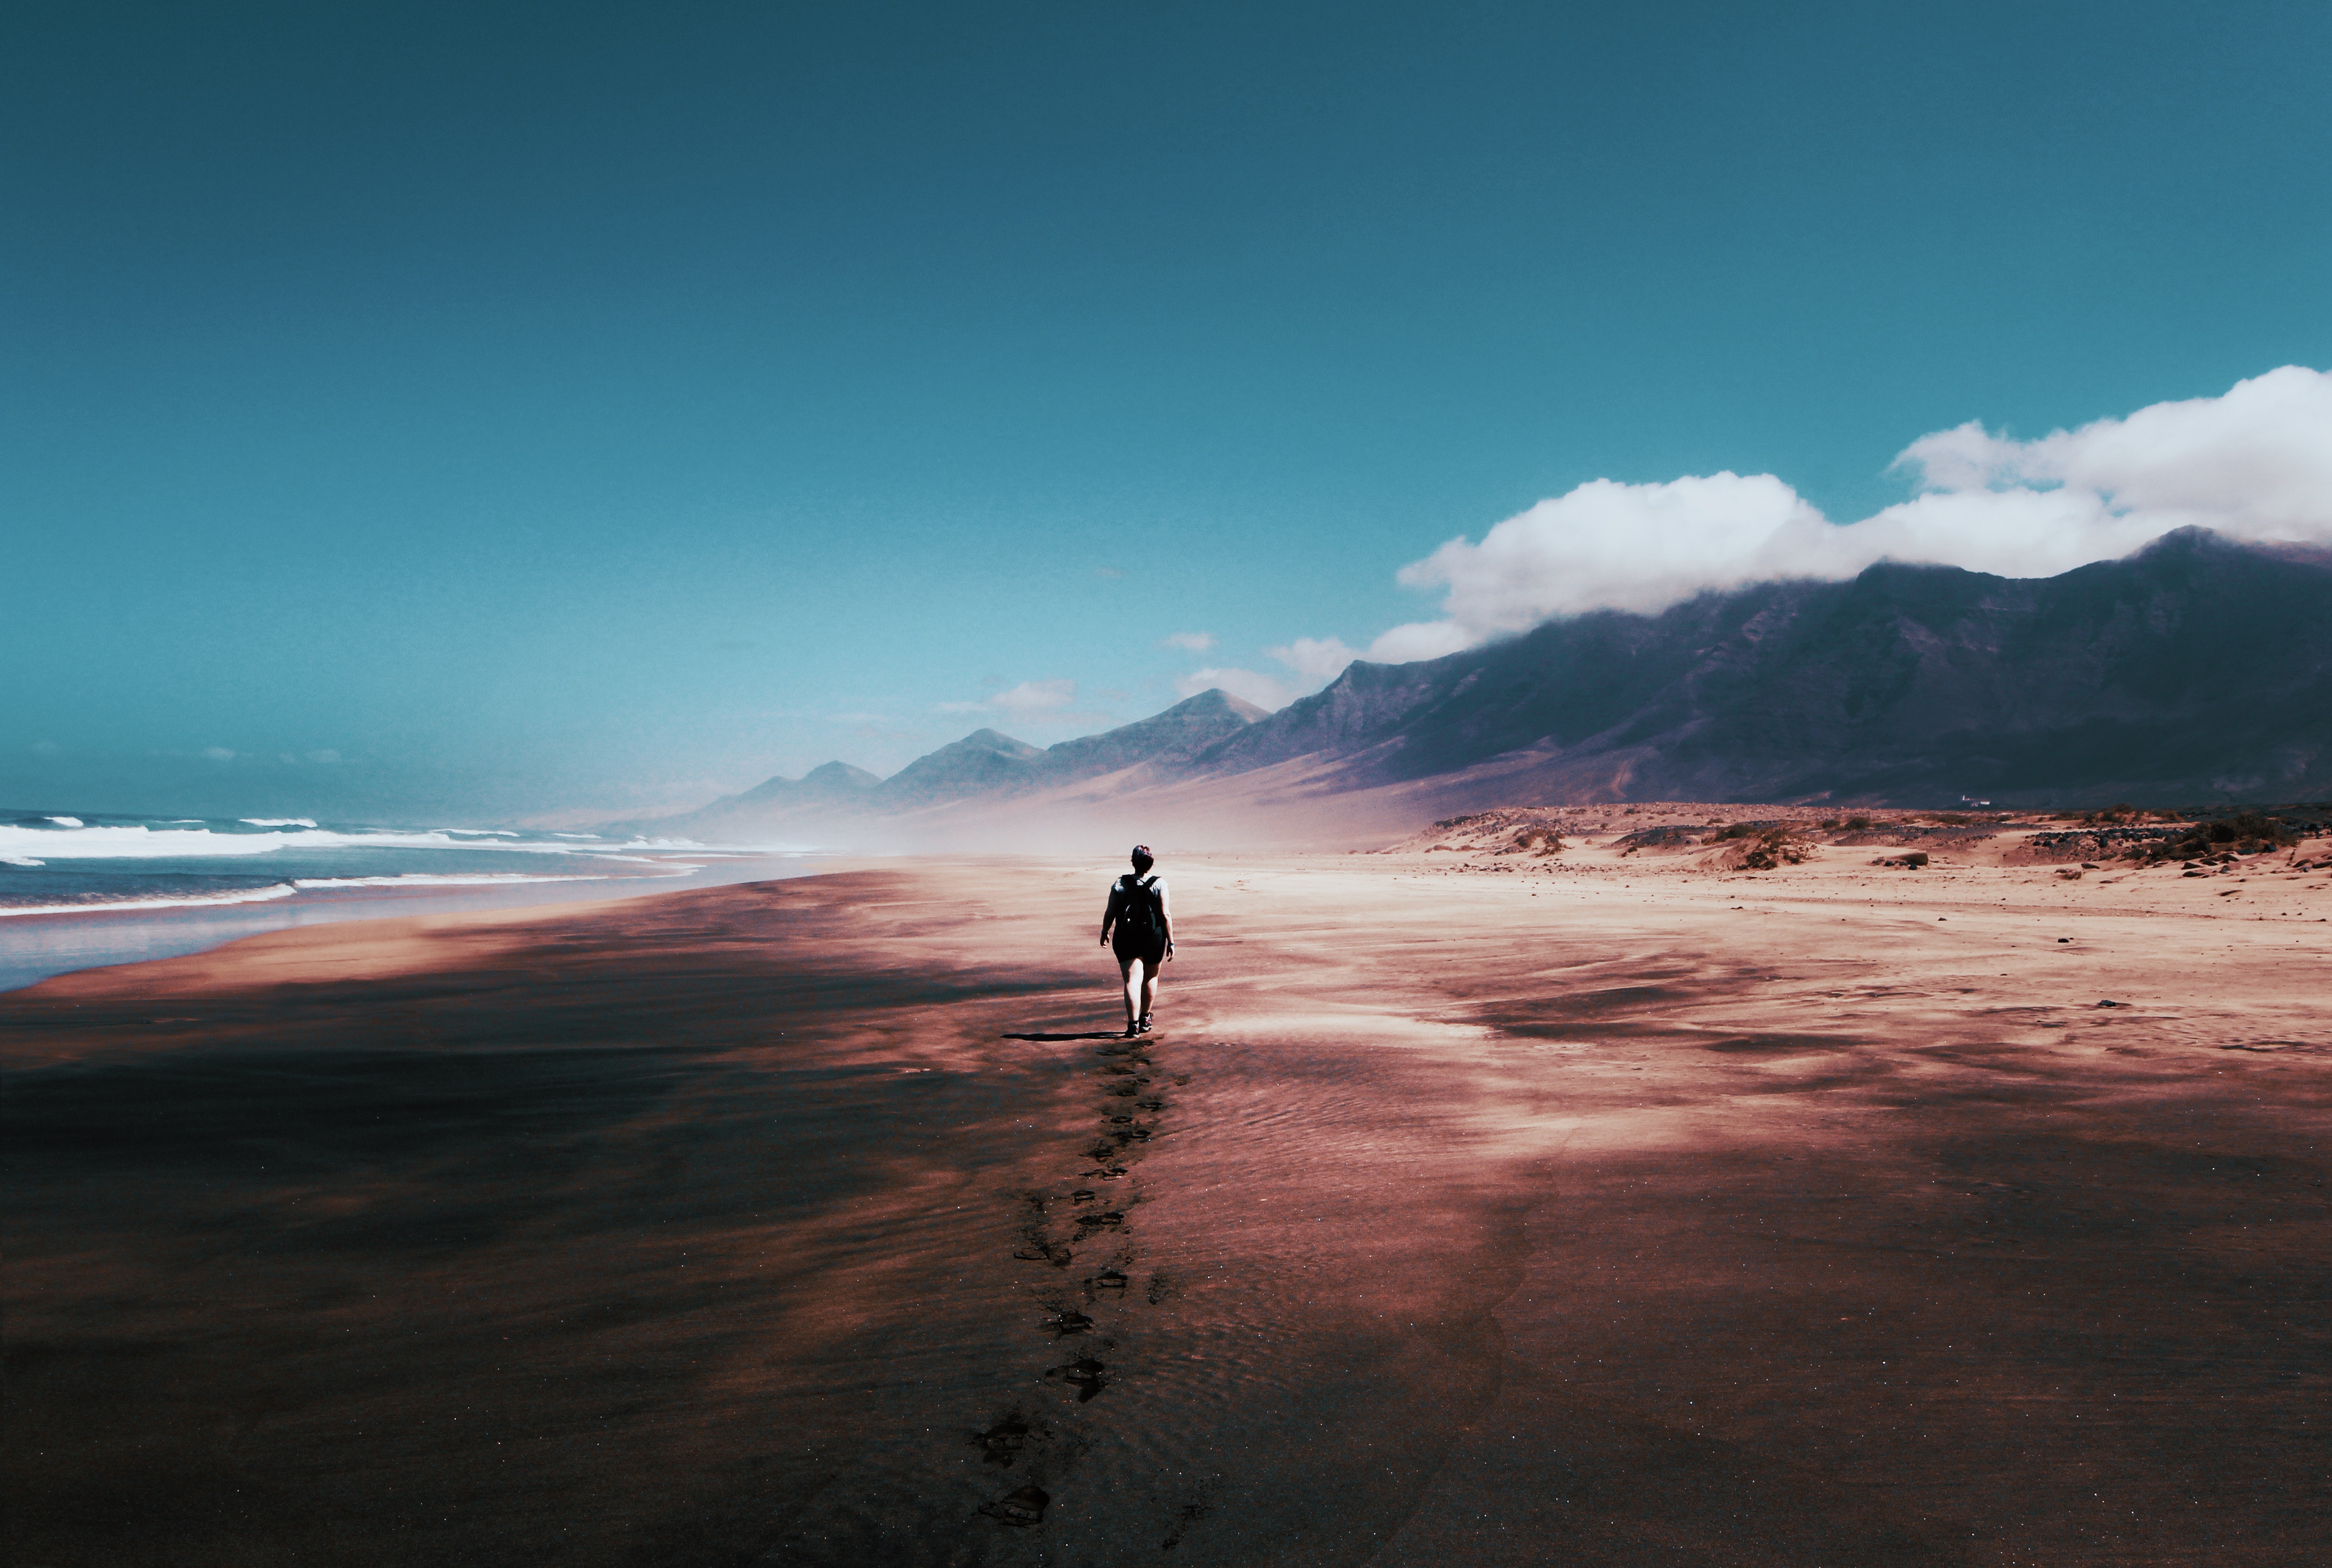 A person walks on a wide beach expanse